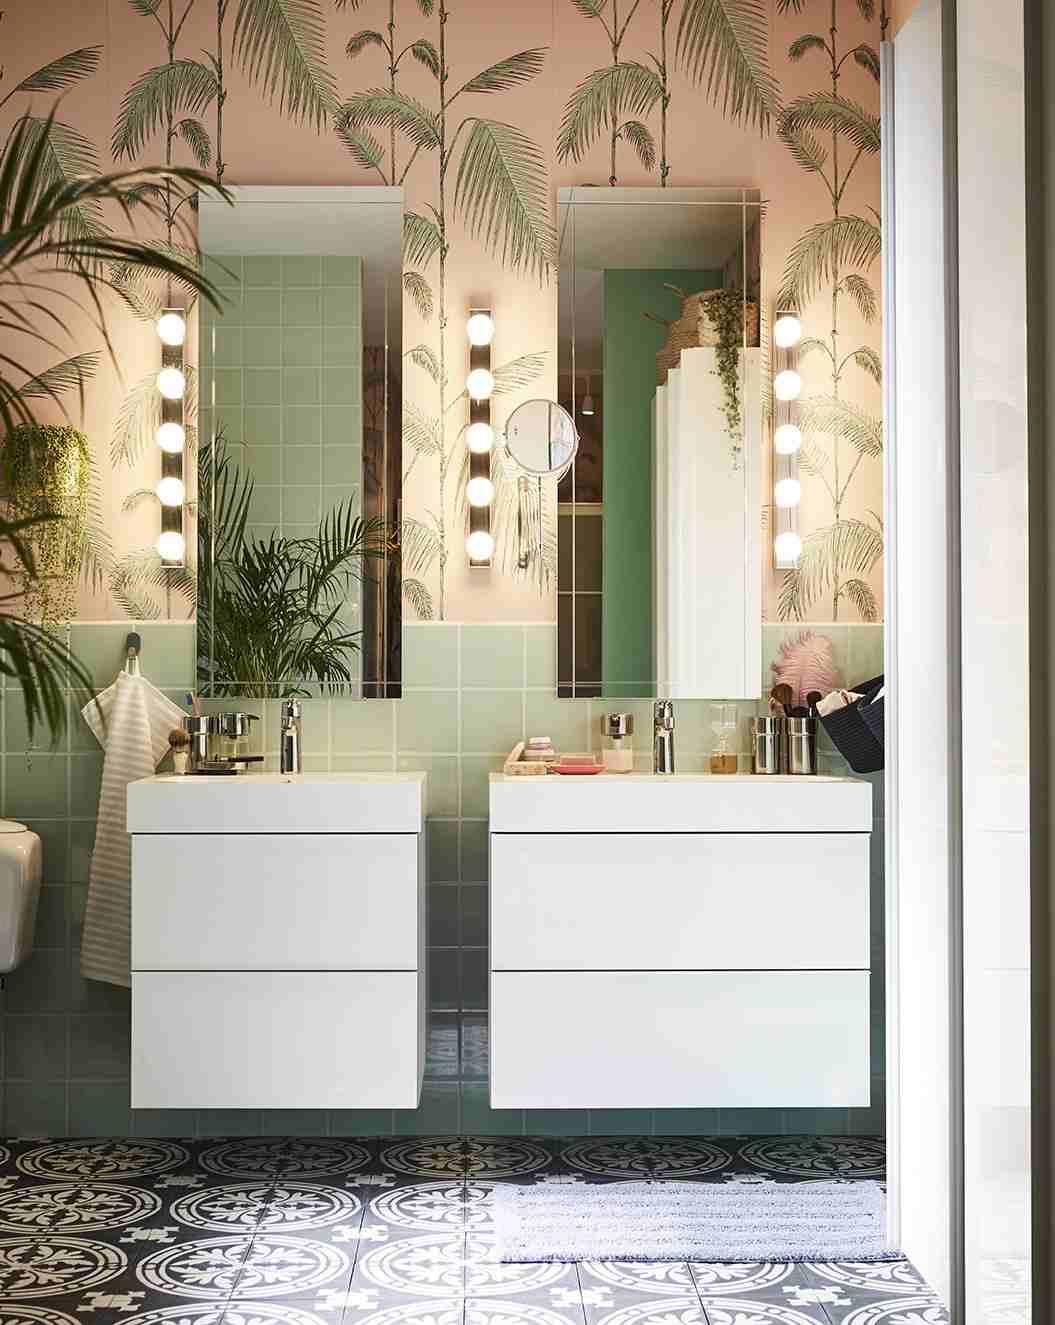 Ikea bathroom ideas for small spaces: 11 functional and inspiring